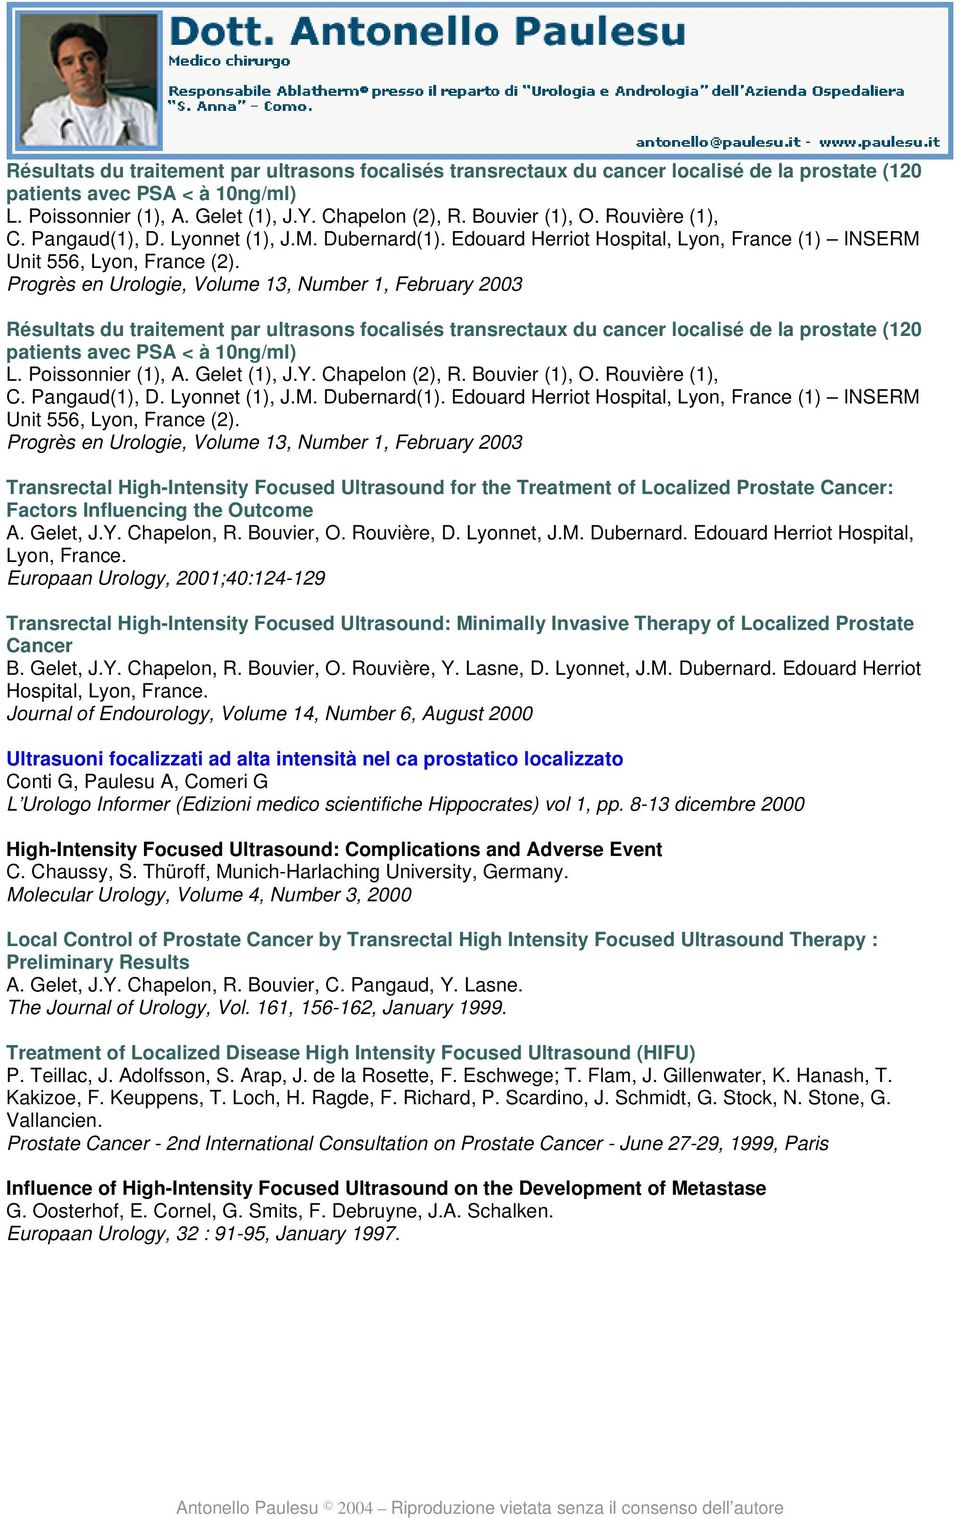 Progrès en Urologie, Volume 13, Number 1, February 2003   Progrès en Urologie, Volume 13, Number 1, February 2003 Transrectal High-Intensity Focused Ultrasound for the Treatment of Localized Prostate